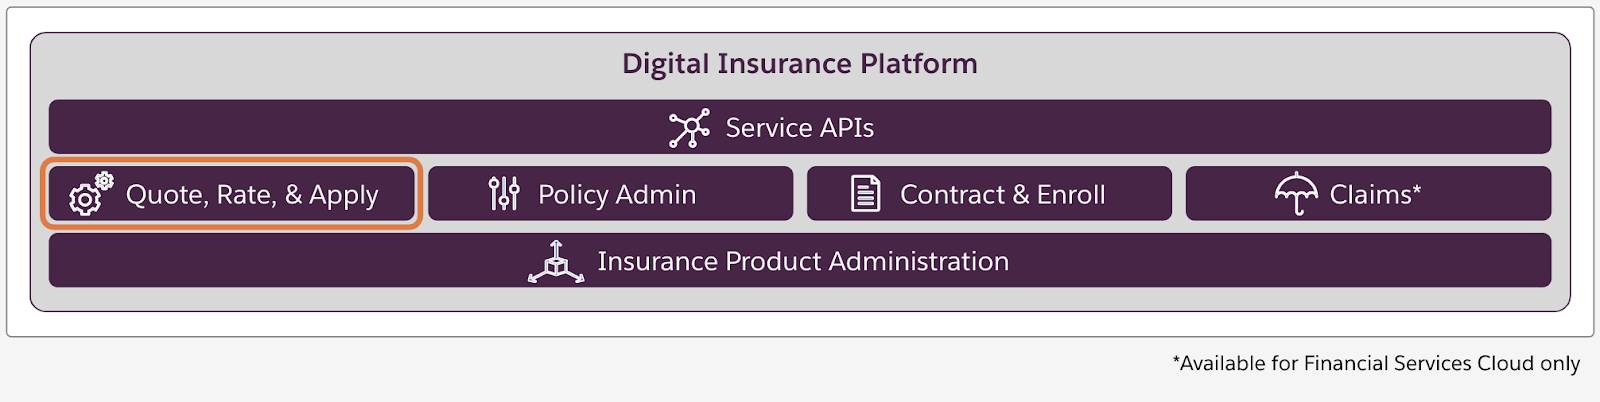 Layers of components form the Digital Insurance Platform. Insurance Product Administration sits across the bottom, Insurance modules are in the middle, and Service APIs are on top.